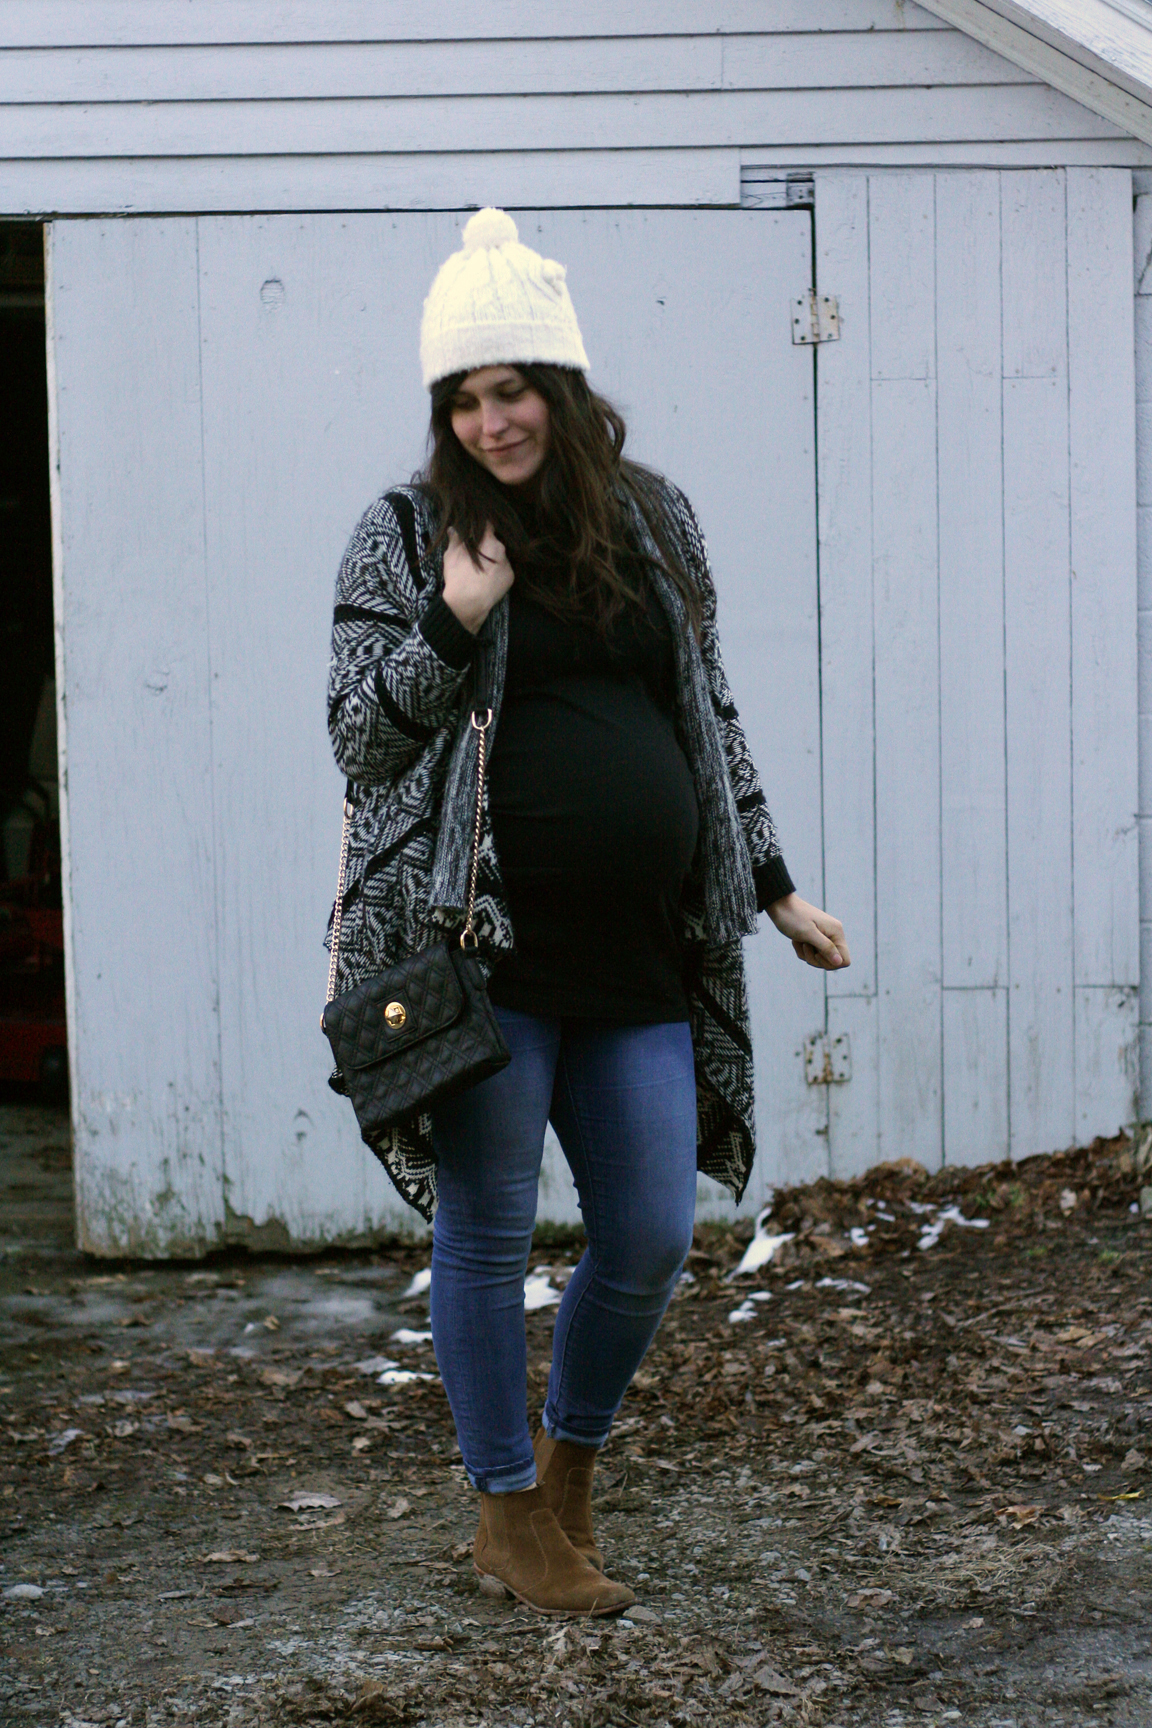 bump style / my other winter uniform